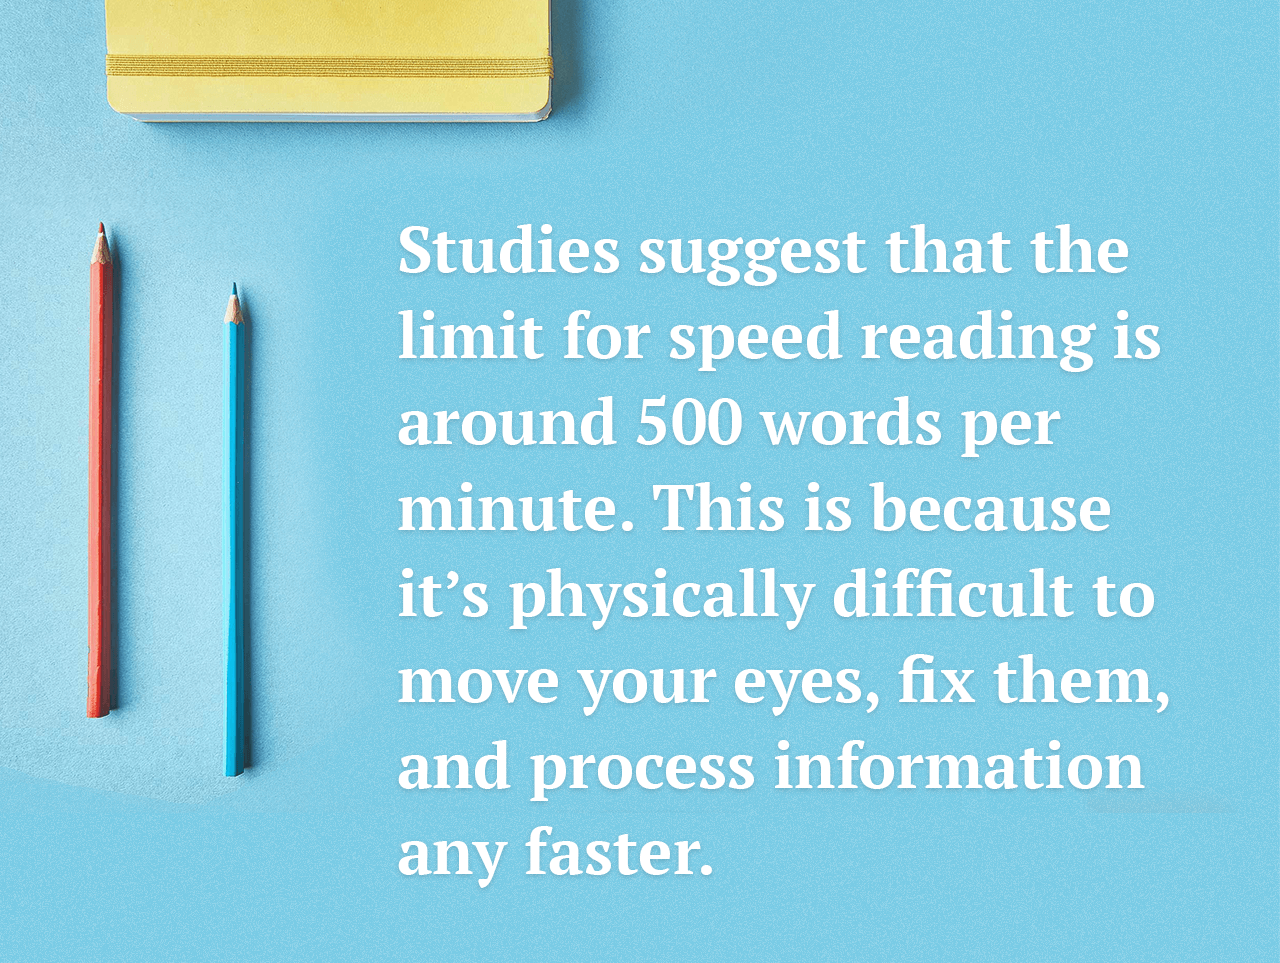 Limits for Speed Reading Fact.